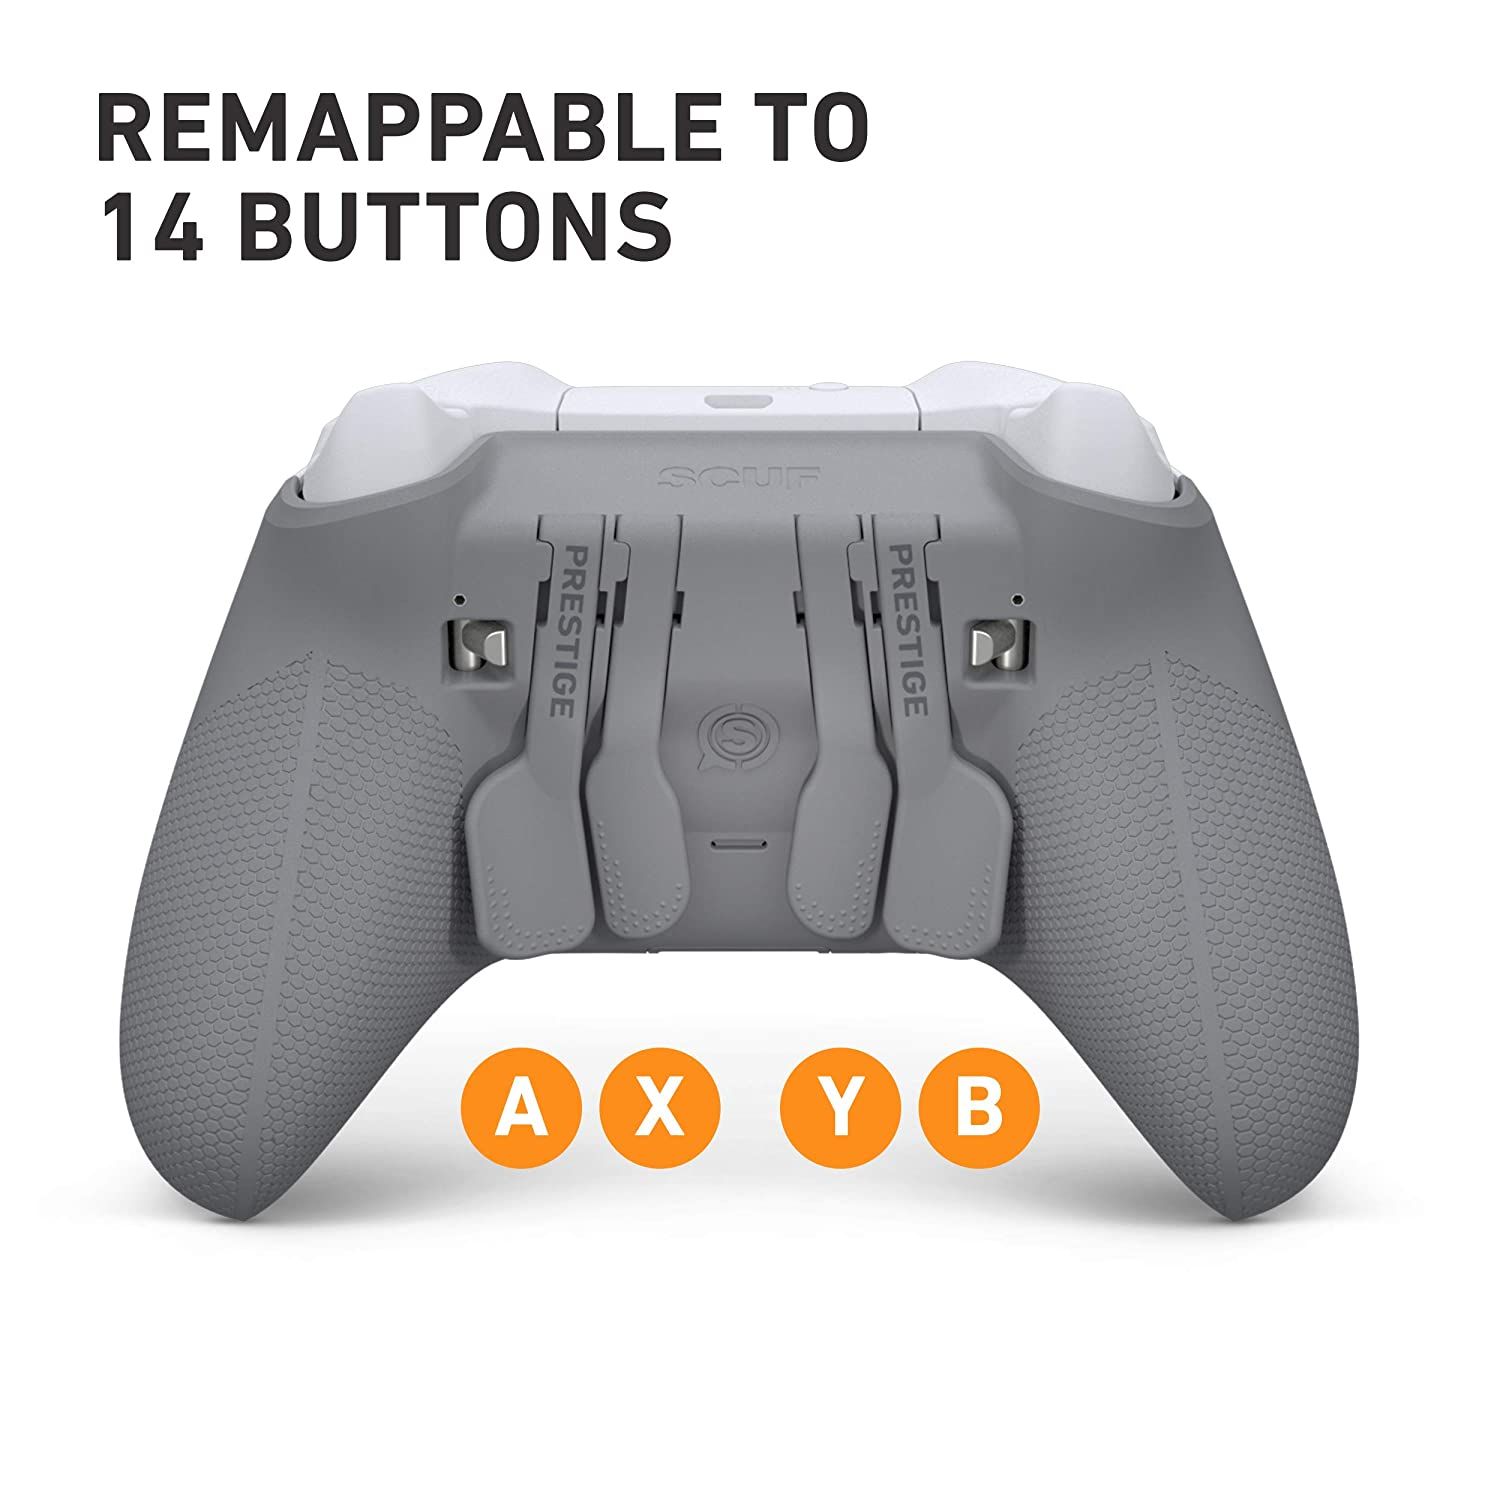 Scuf Prestige 14 remappable buttons